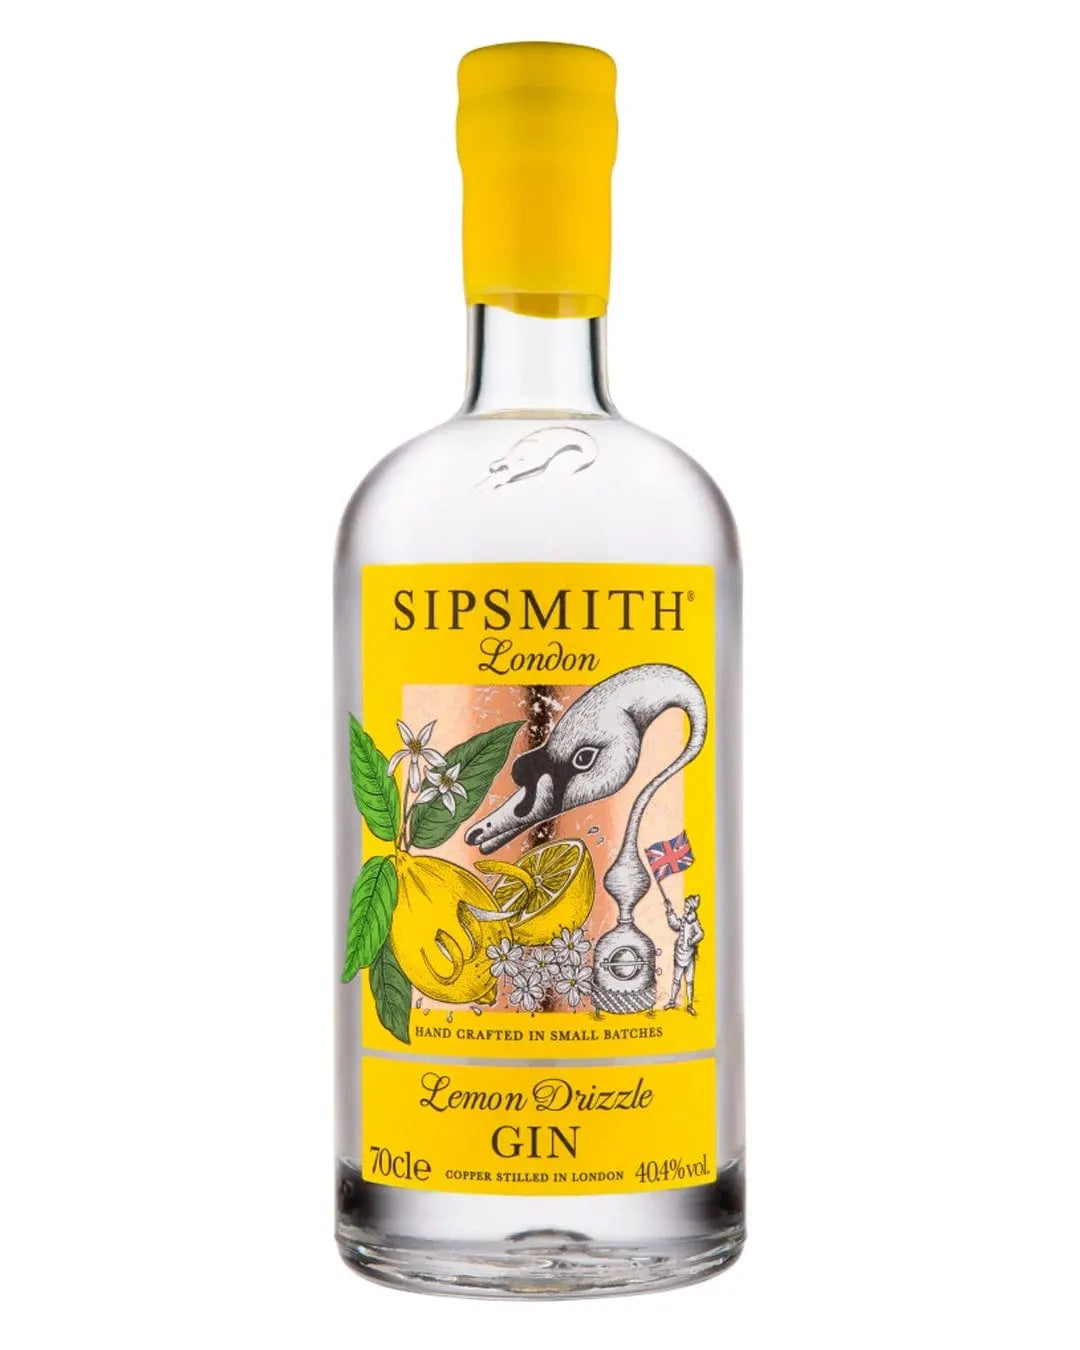 Sipsmith Lemon Drizzle Gin, 70 cl Gin